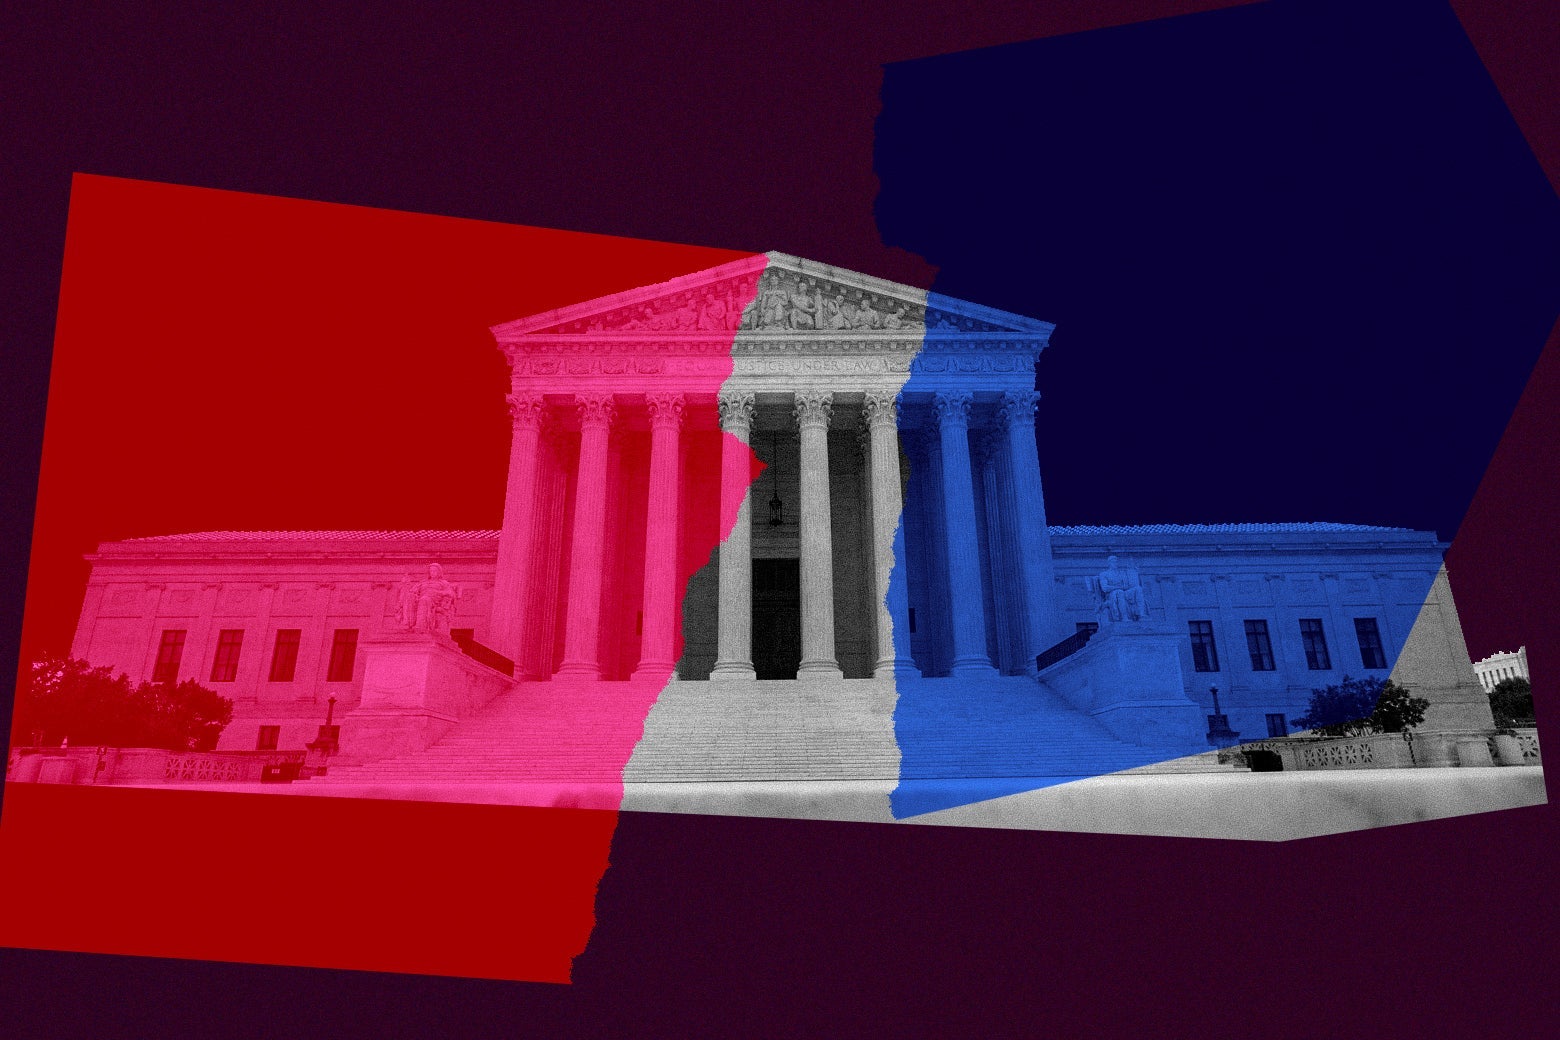 Supreme Court building with red and blue shapes superimposed on it to suggest partisanship